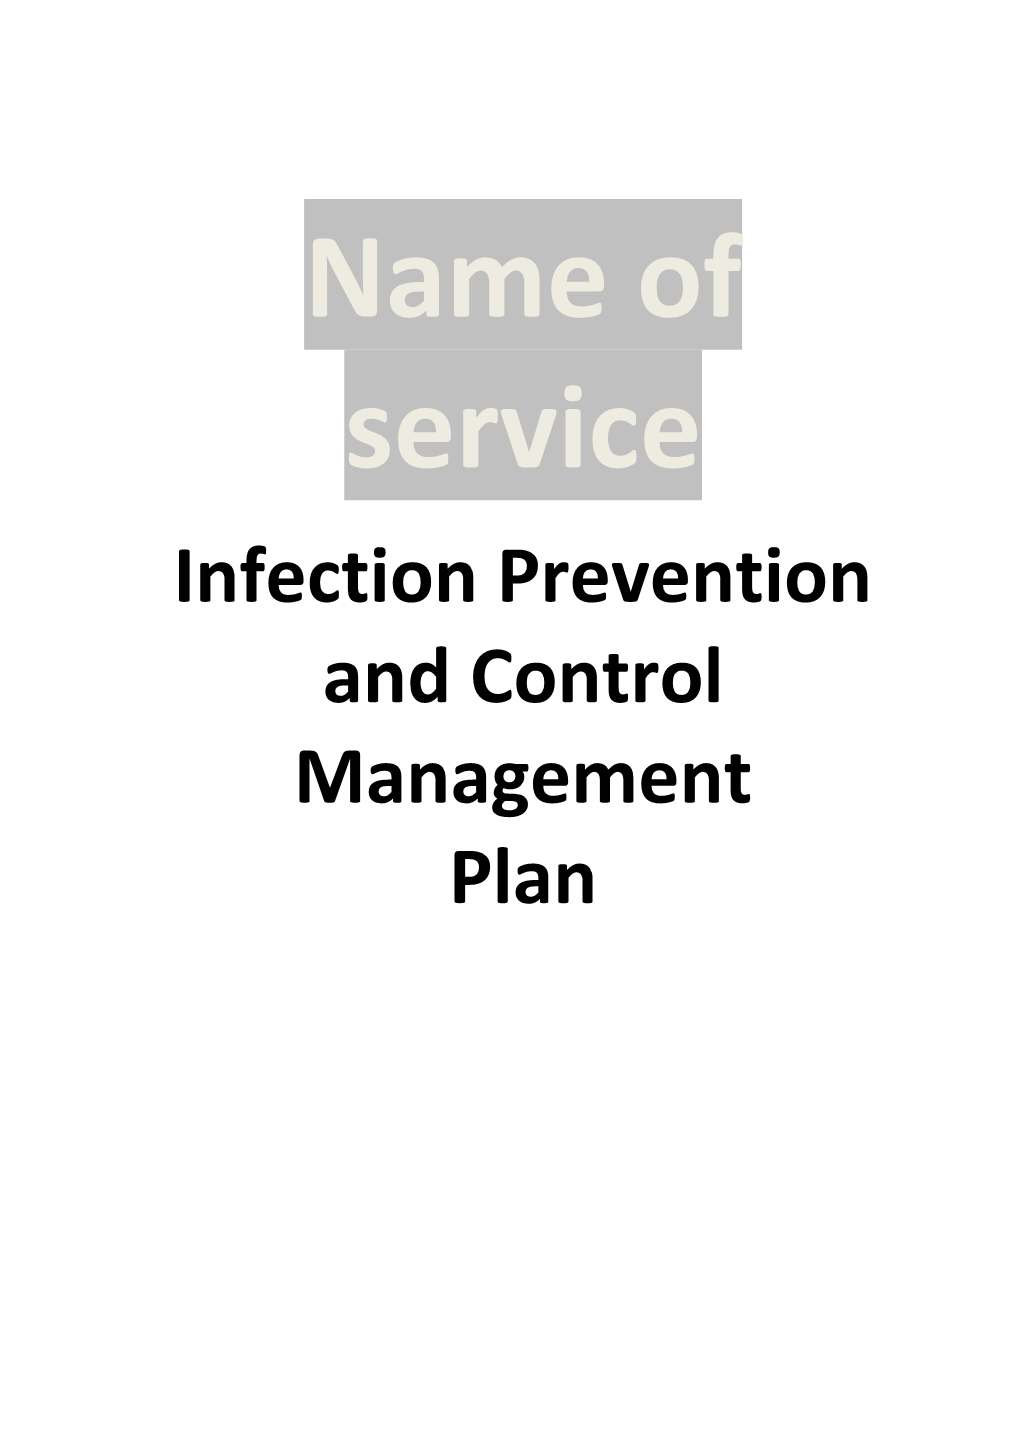 Infection Prevention and Control Management